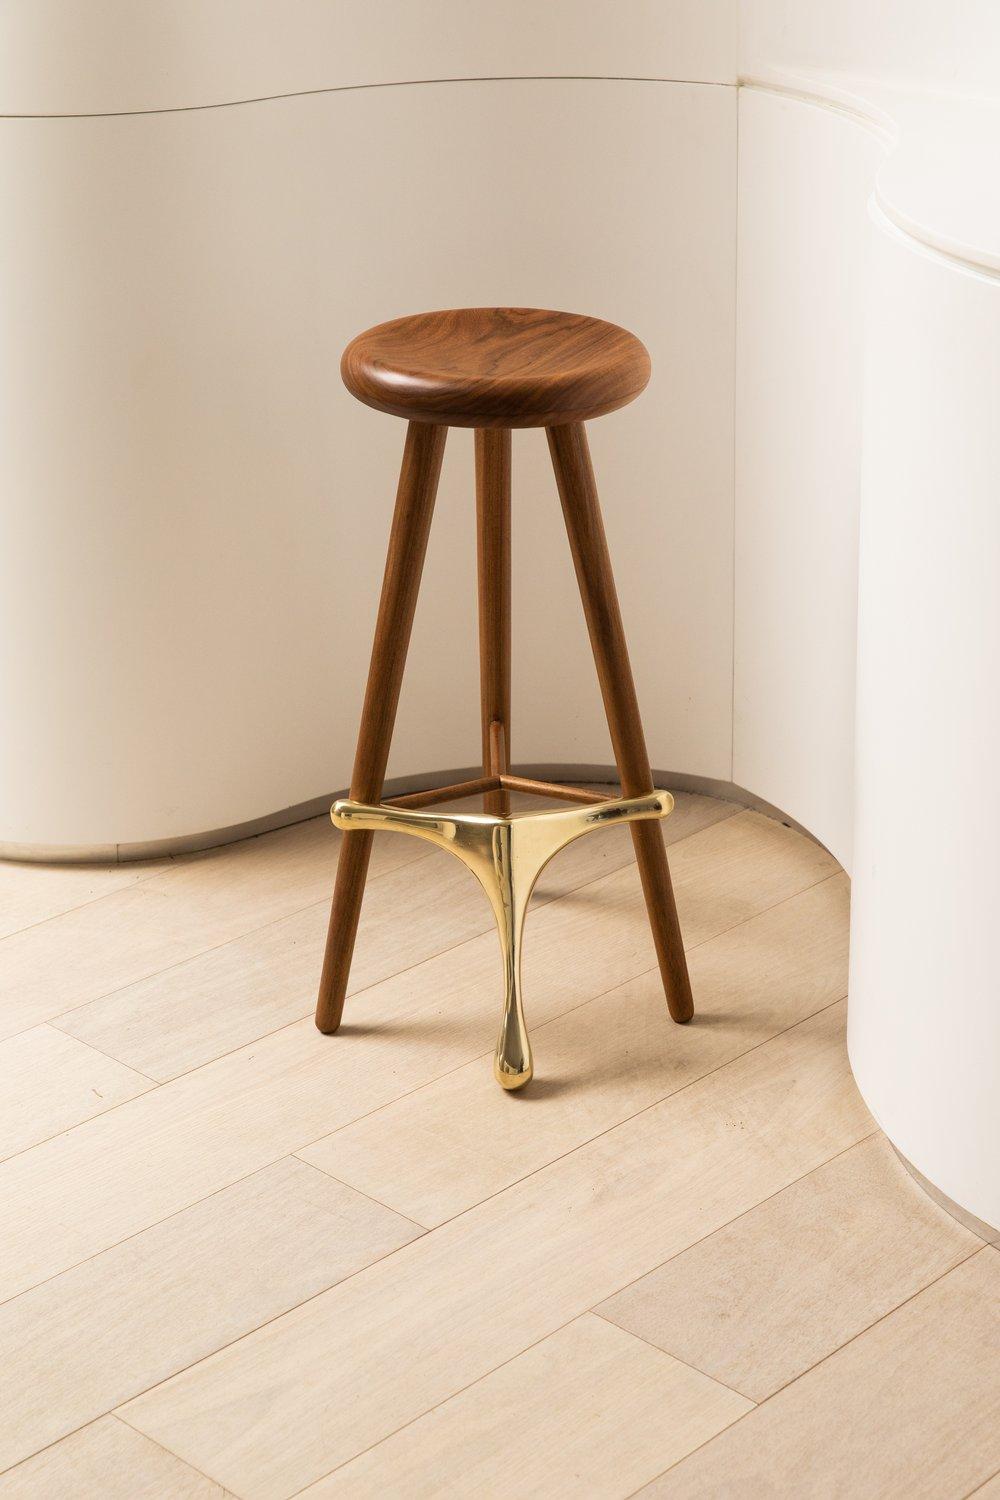 Amparo Freijó and Bronze Stool by Alva Design
Materials: solid wood (Freijó) and cast bronze.
Dimensions: W 37 x D 48 x H 63 cm.

Available in different wood options (Braúna or Freijó solid wood) and footrest options (solid wood, iron or cast